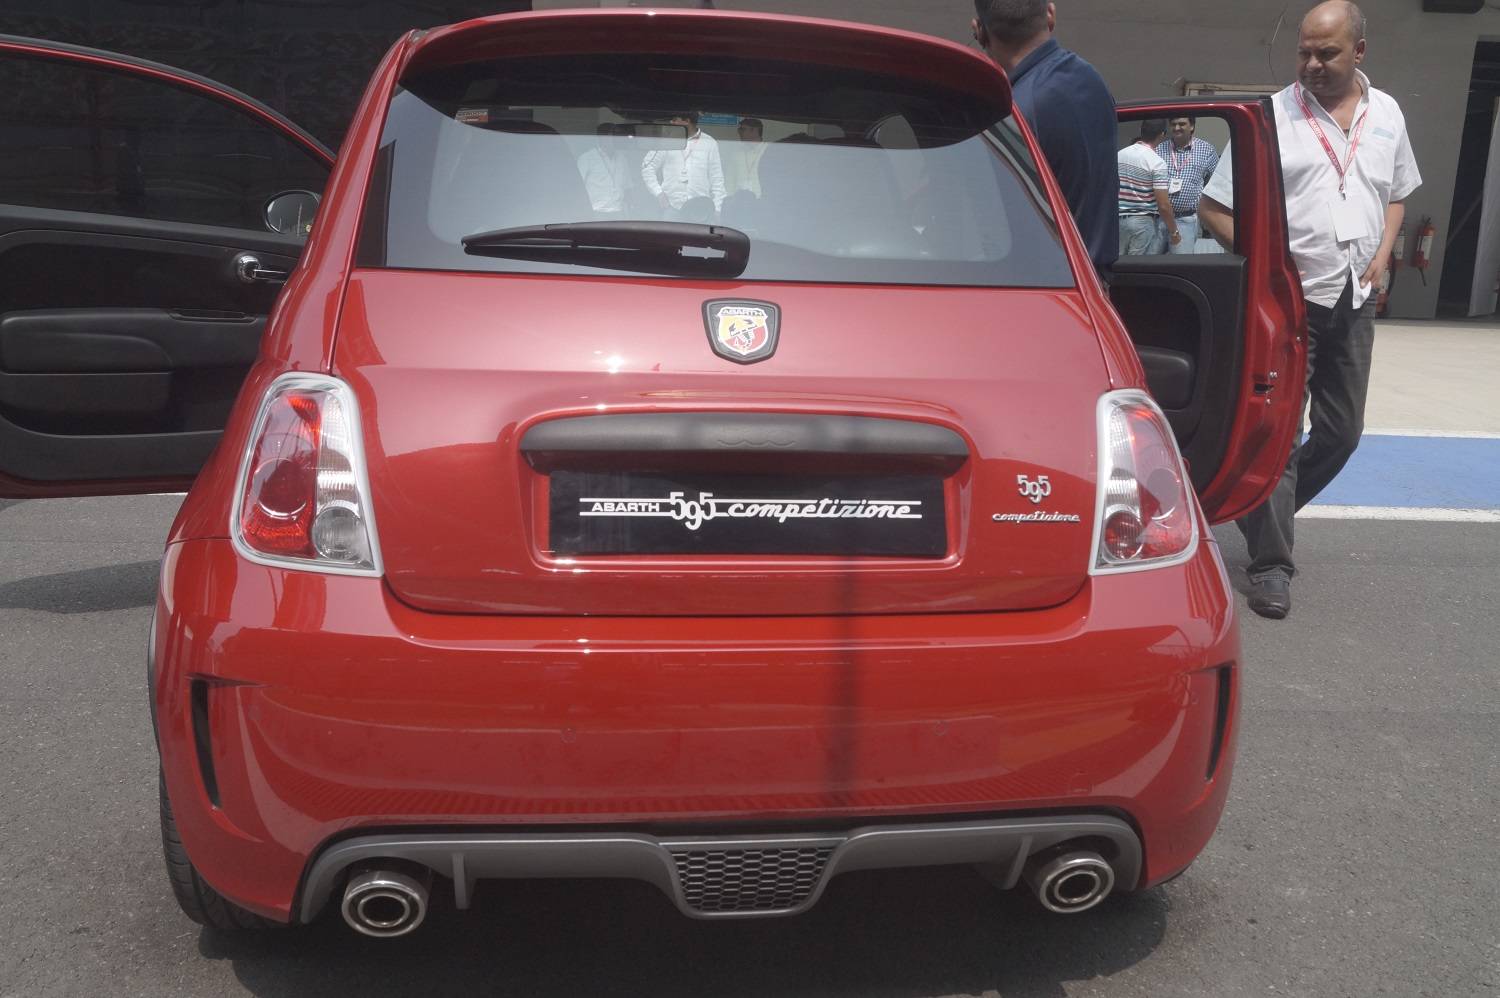 Fiat Abarth 595 Competizione - The new hot hatch in town - Exclusive